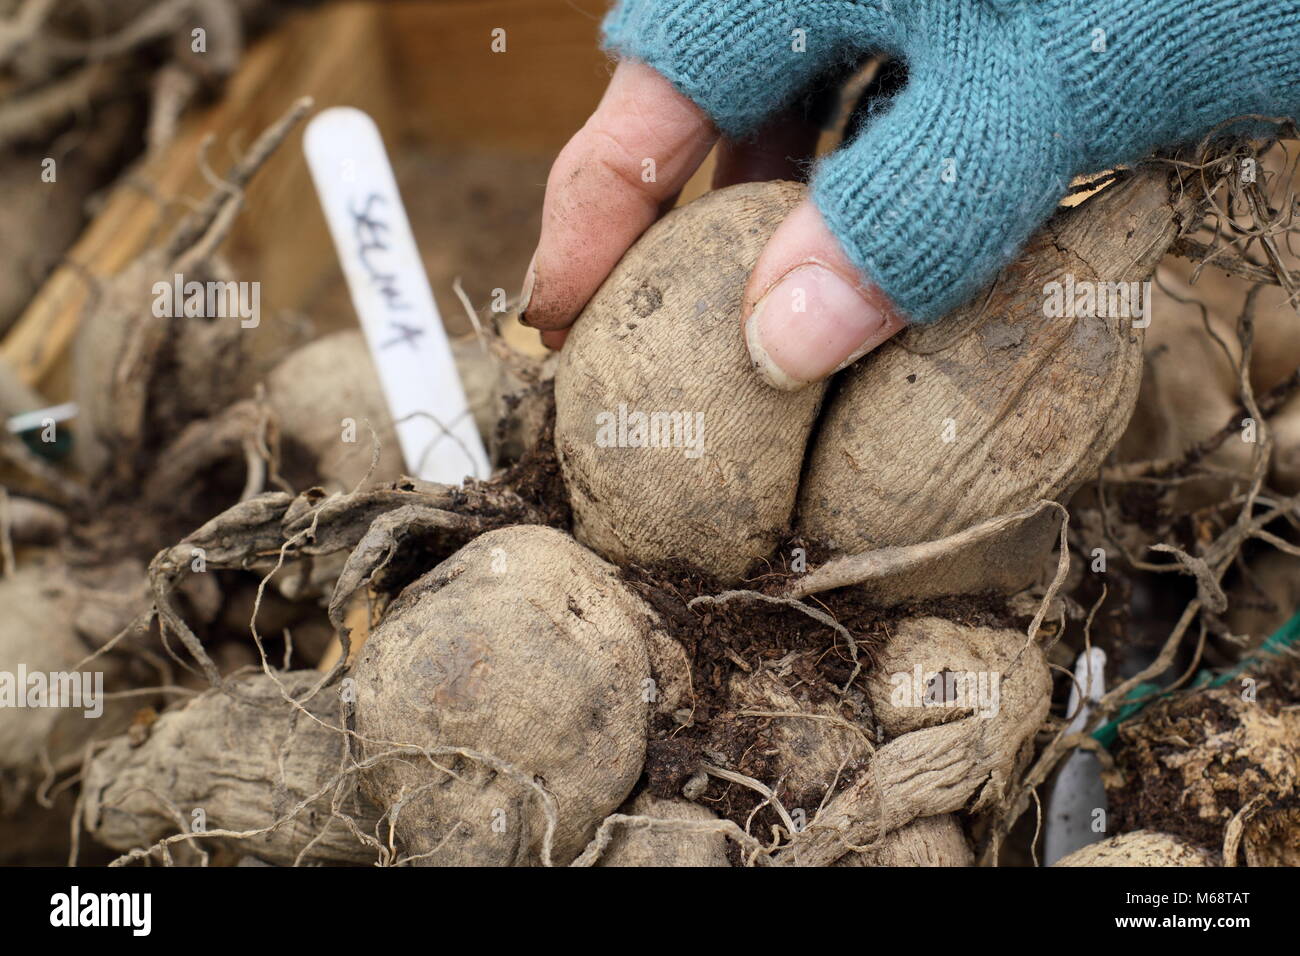 Checking dahlia tubers for rot during over winter storage, UK Stock Photo